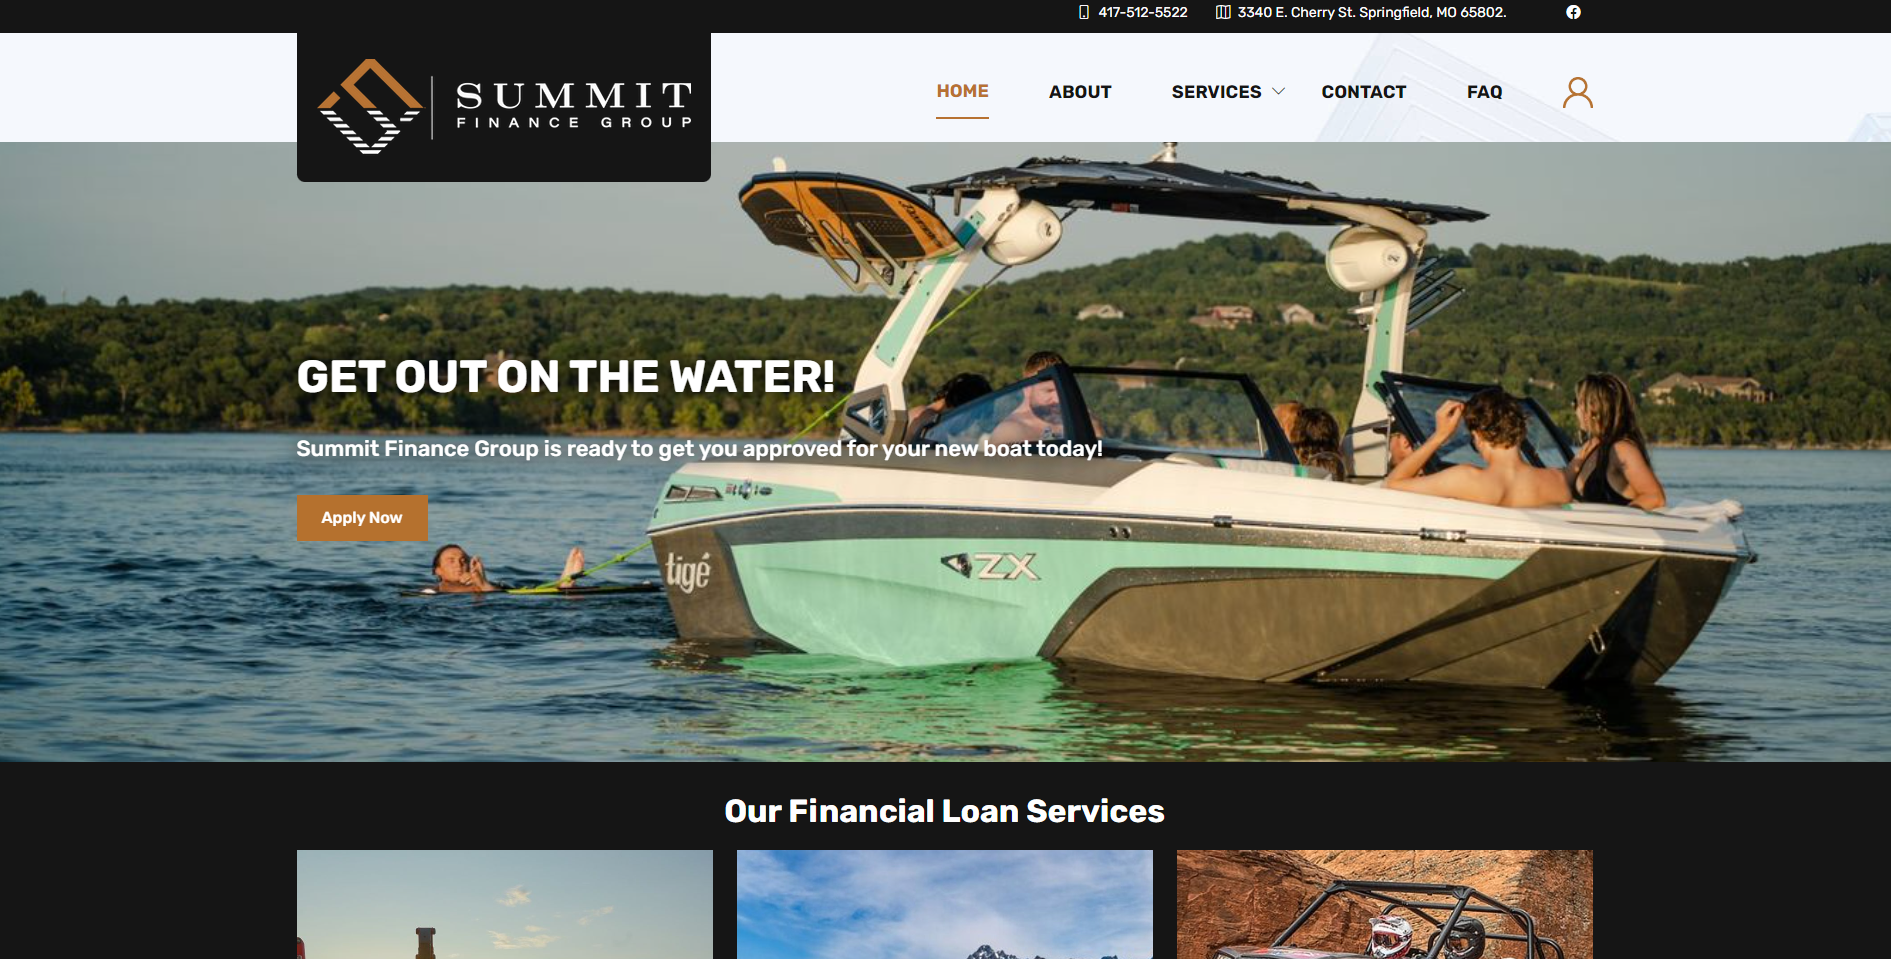 Web Design for Summit Finance Group